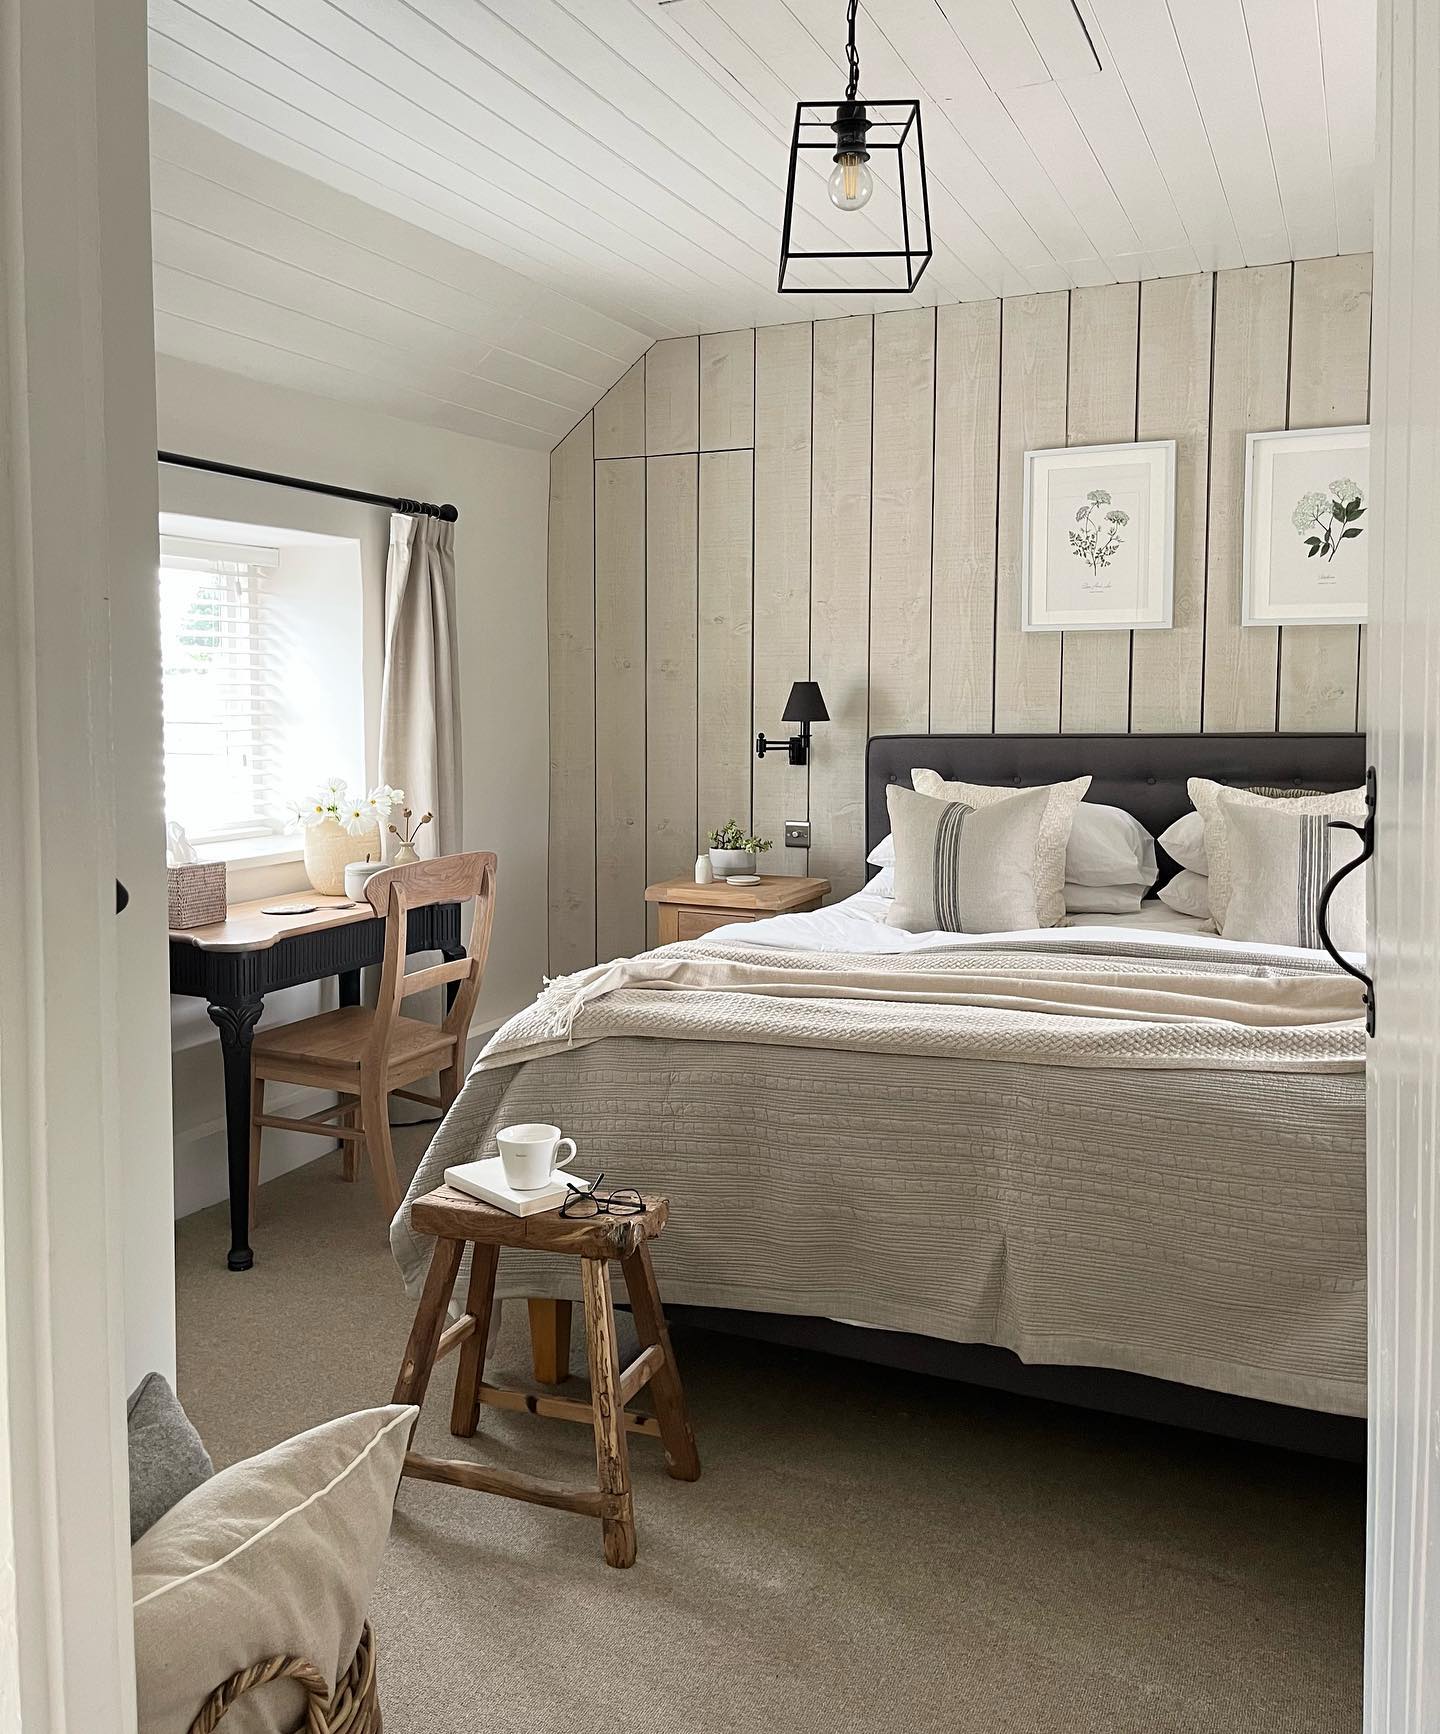 a modern cottage interior is palpable in this bedroom with wood paneling and furnishings along with linen bedding